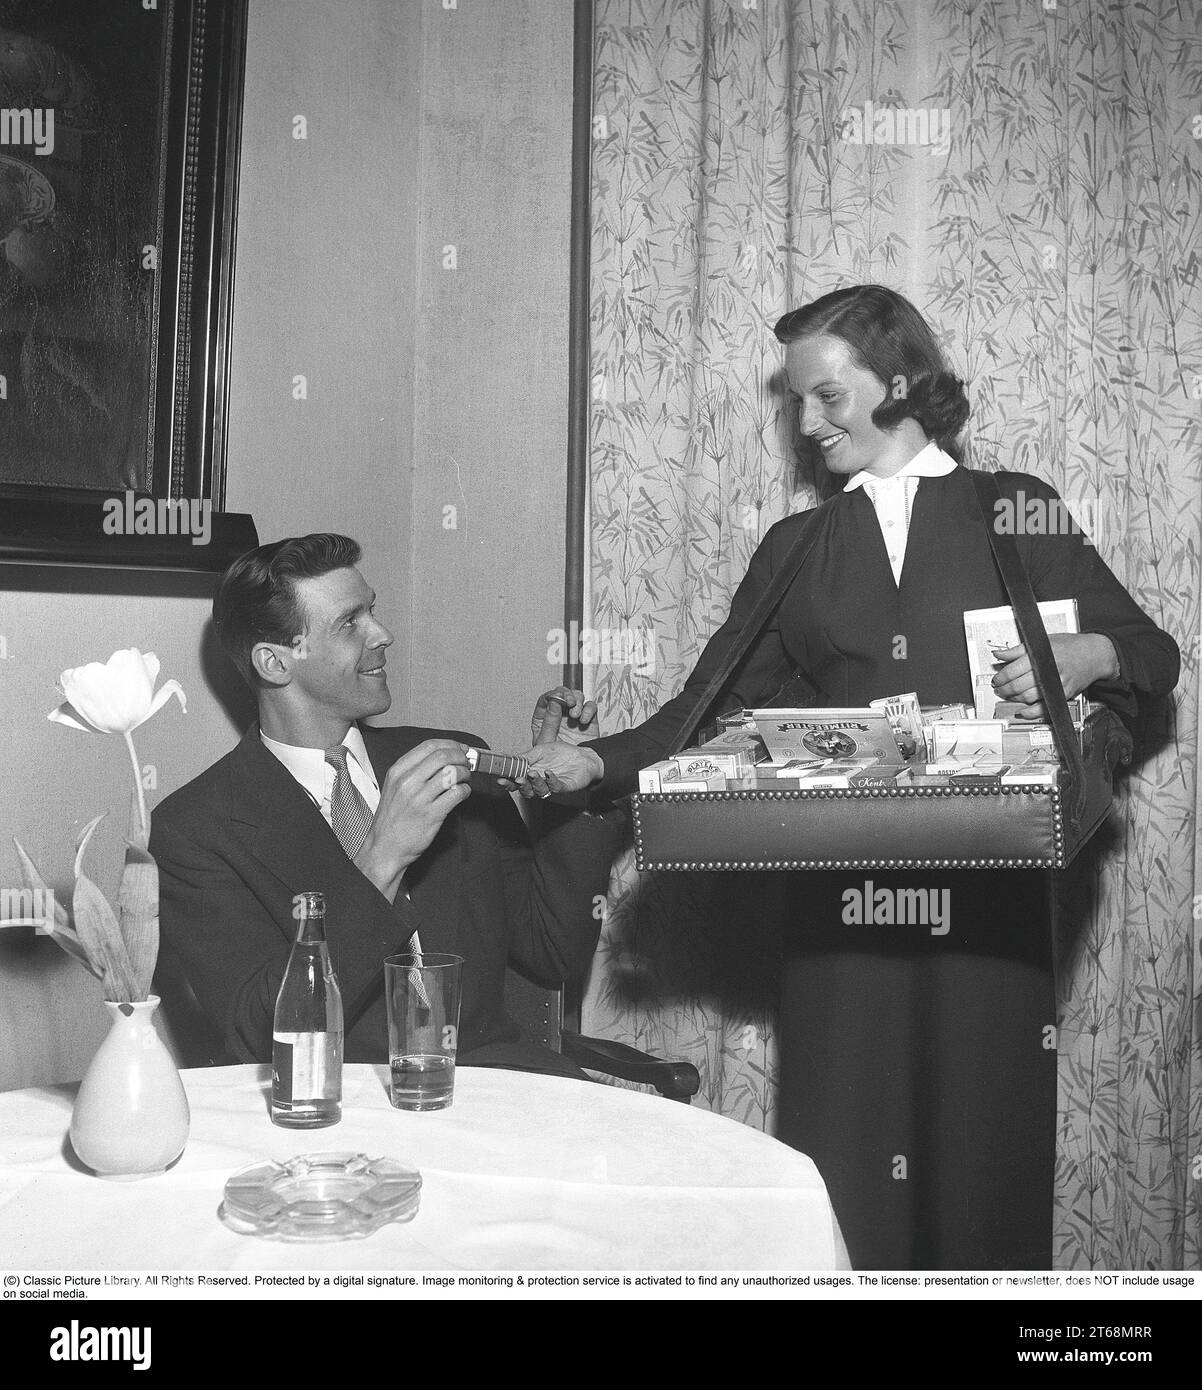 In the 1950s. A cigarette girl going around the tables in the restautrant selling cigarettes from her box seen in front of her. A man is seen recieving a package and has a coin in his hand to pay.  Sweden 1953  Kristoffersson ref  BL39-12 Stock Photo